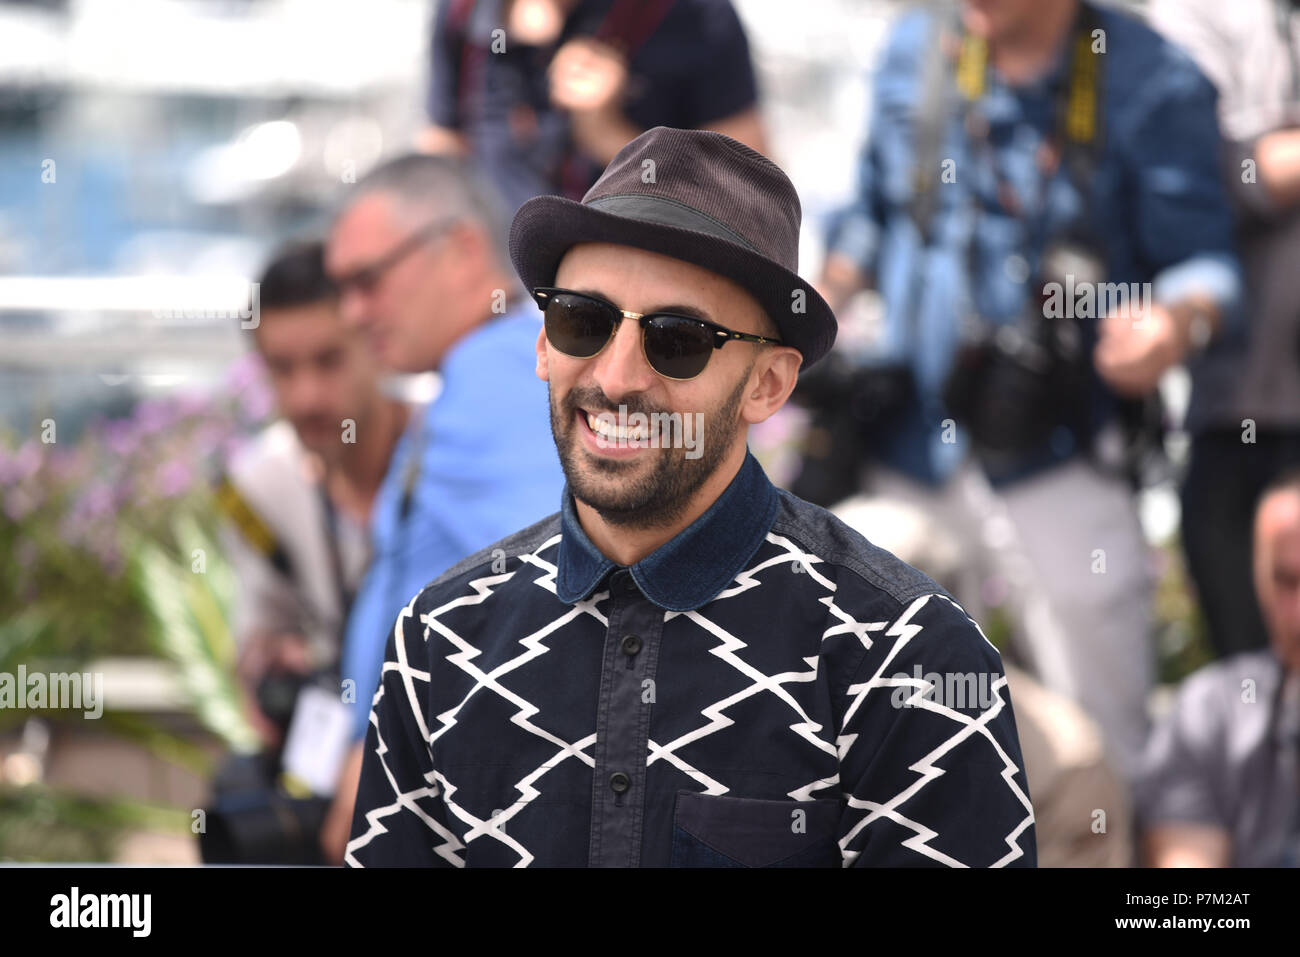 May 19, 2017 - Cannes, France: JR  attends the 'Visages, Villages' photocall during the 70th Cannes film festival. JR lors du 70eme Festival de Cannes. *** FRANCE OUT / NO SALES TO FRENCH MEDIA *** Stock Photo